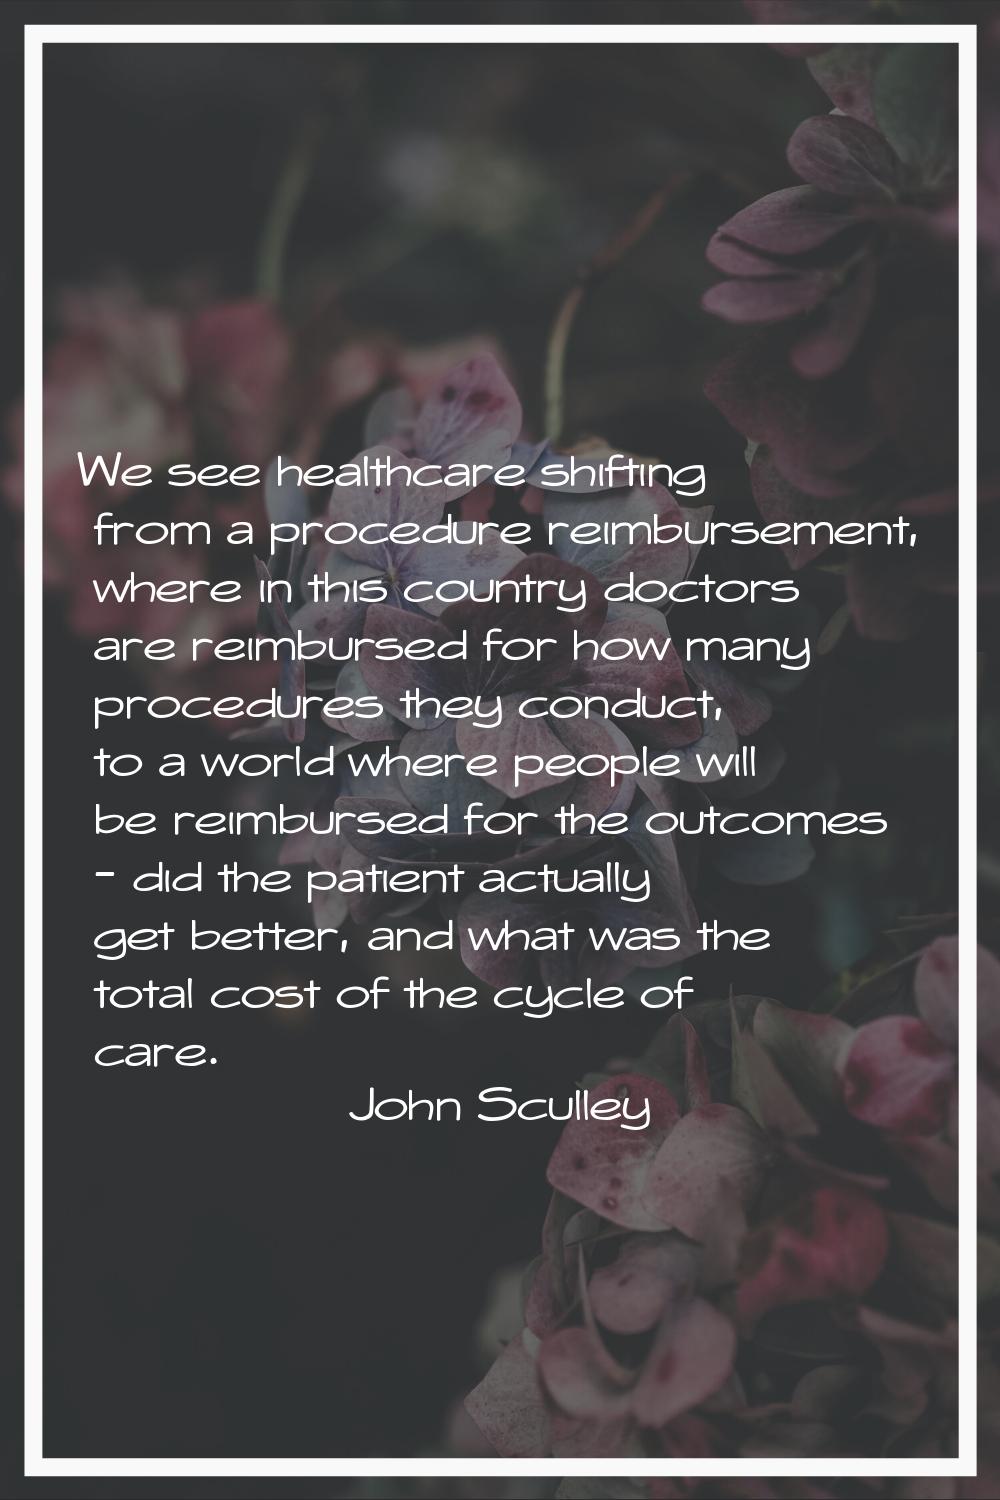 We see healthcare shifting from a procedure reimbursement, where in this country doctors are reimbu